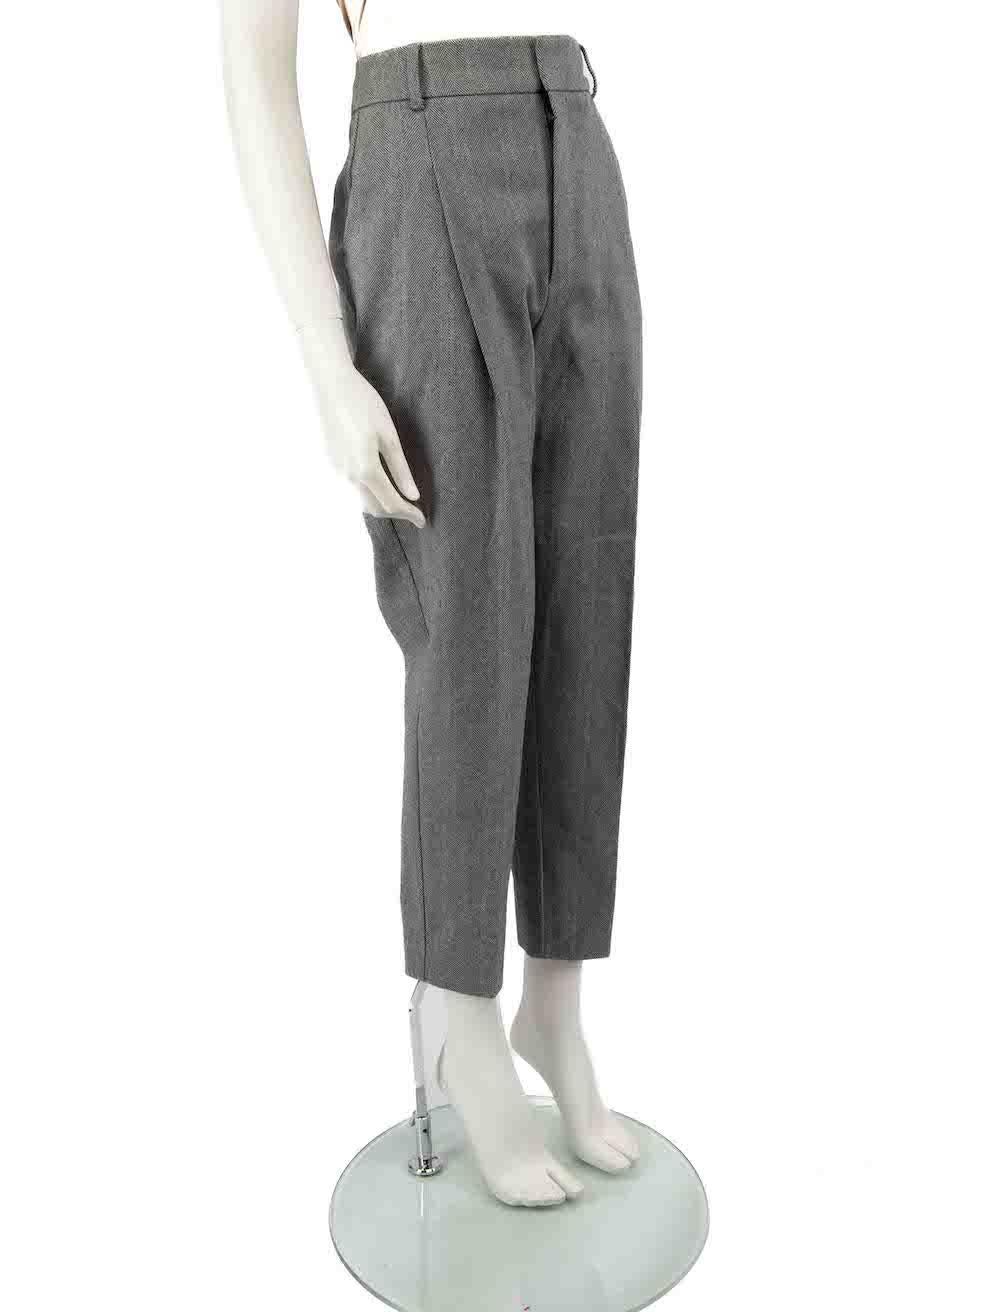 CONDITION is Very good. Hardly any visible wear to trousers is evident on this used Anine Bing designer resale item.
 
 Details
 Grey
 Cotton
 Trousers
 Herringbone pattern
 Tapered fit
 High rise
 
 
 Made in Turkey
 
 Composition
 84% Cotton, 8%